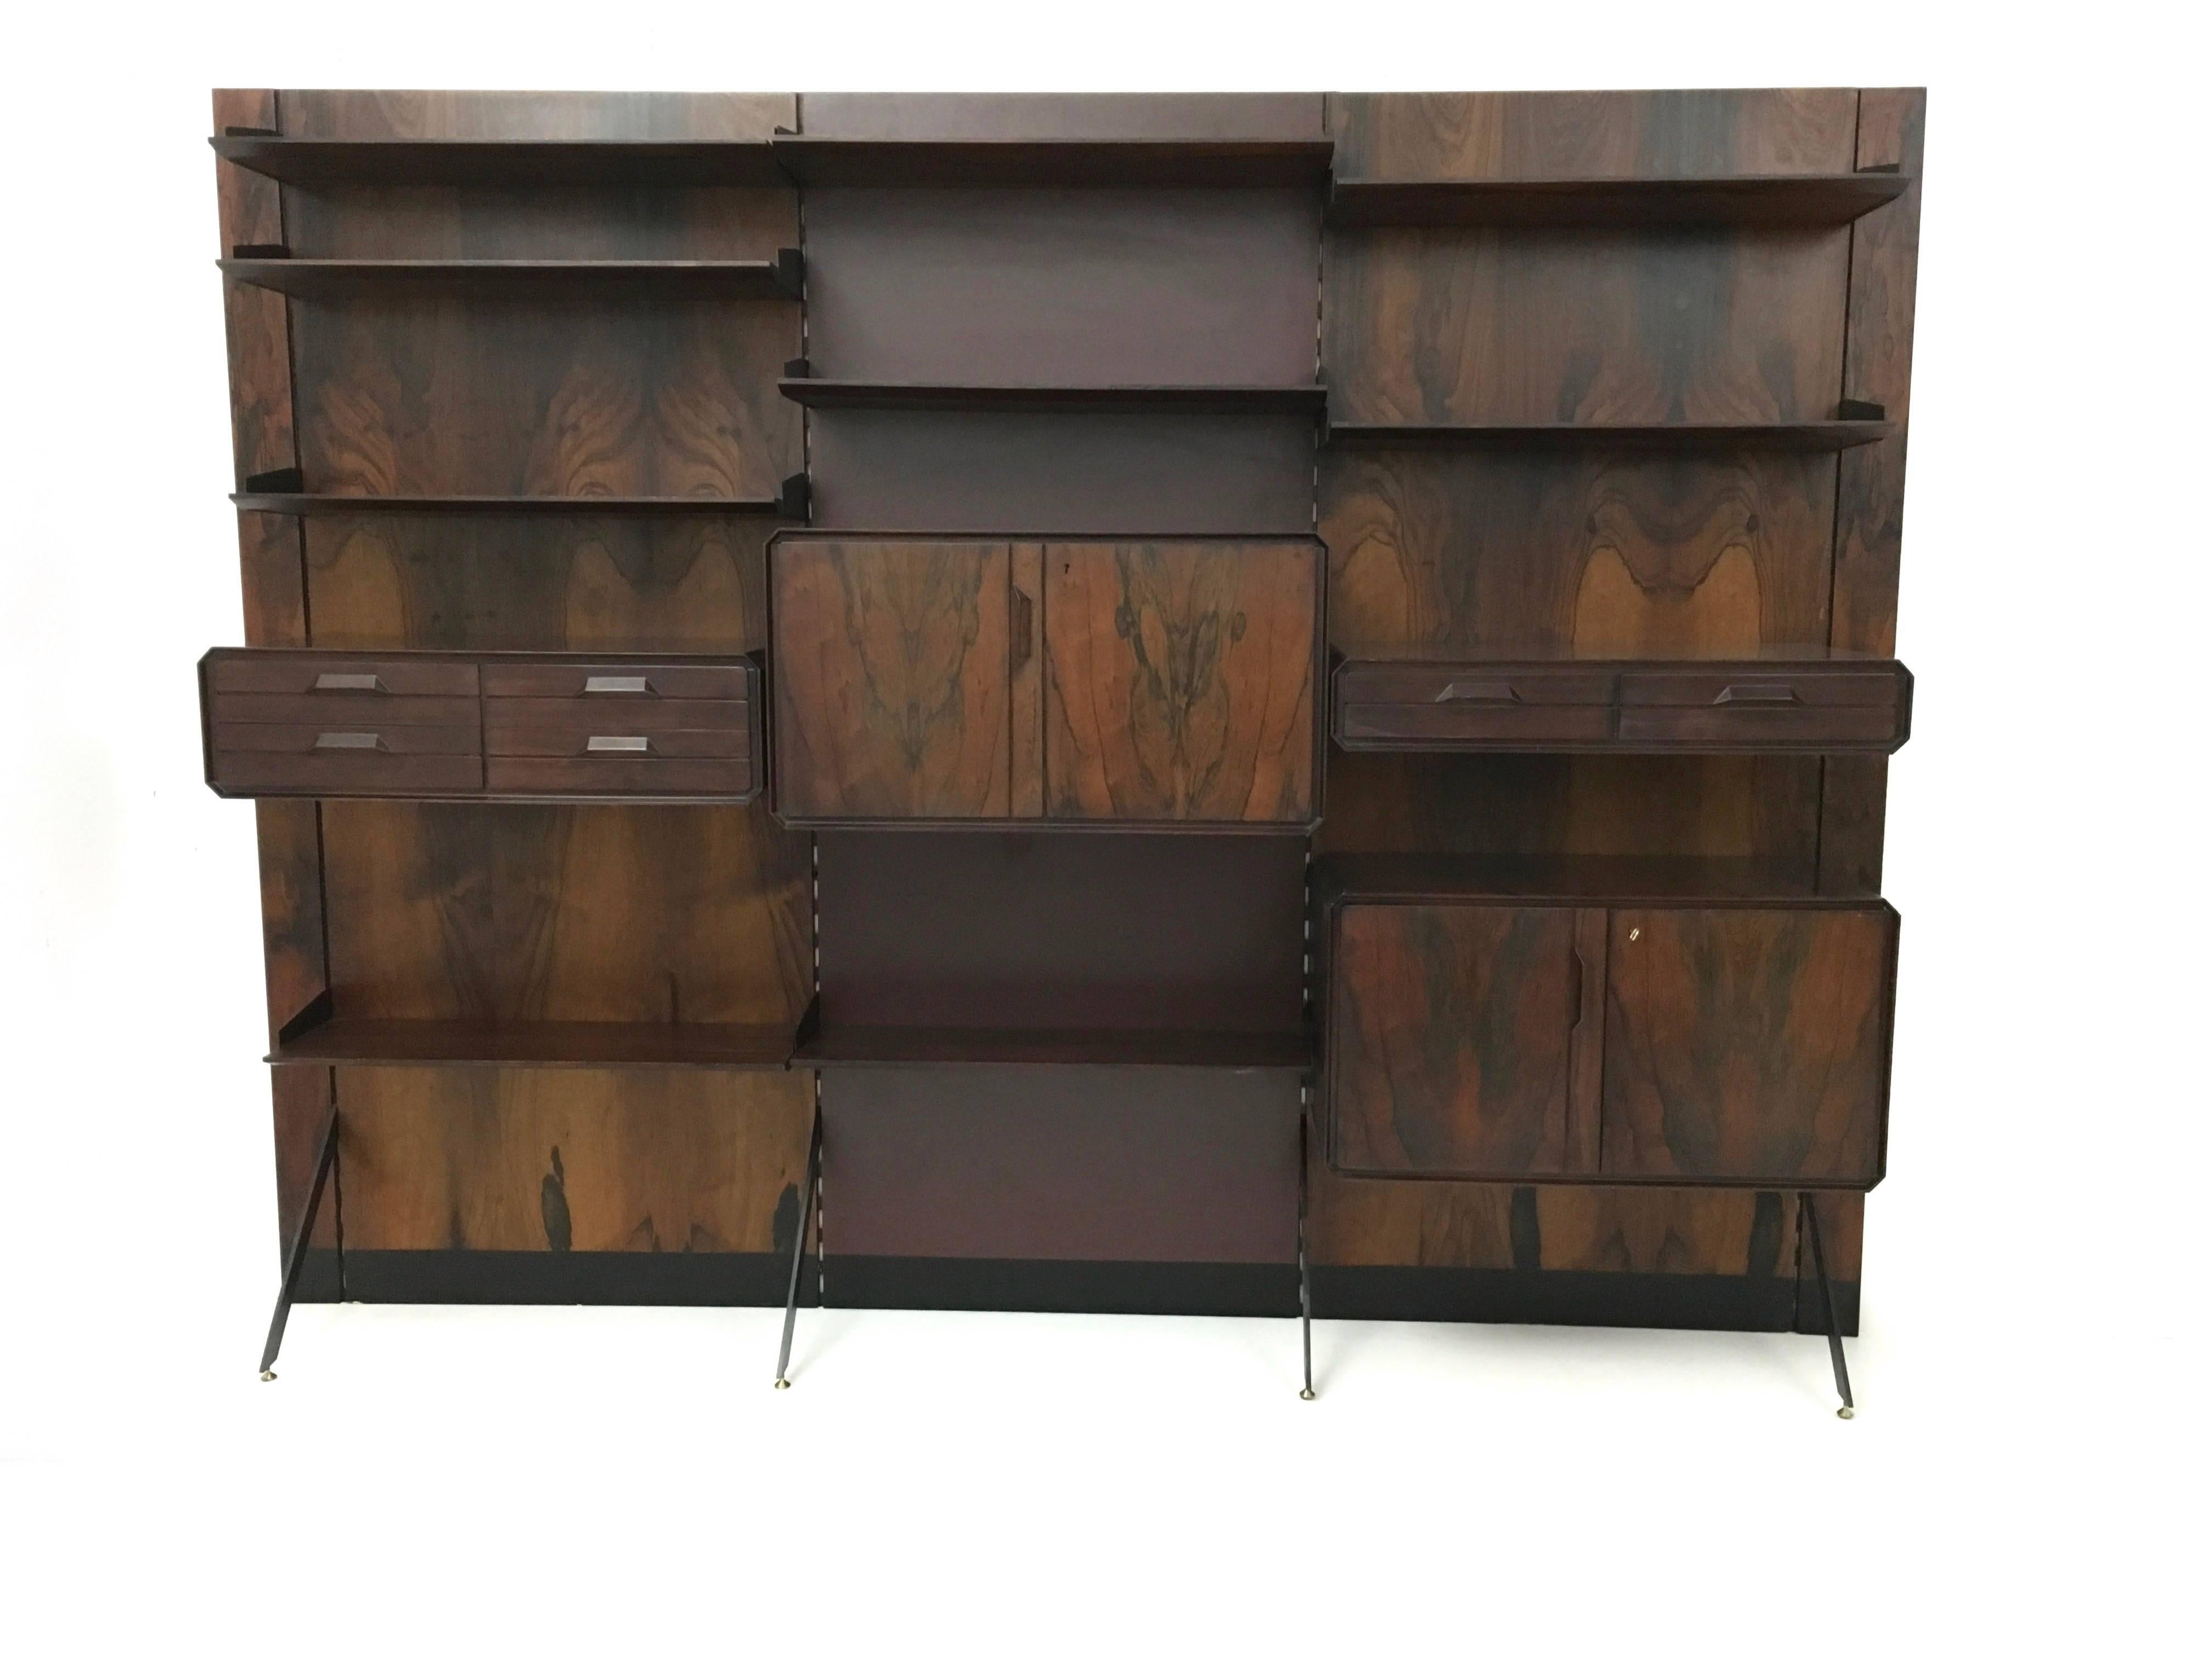 This 1960s bookcase is made from wood, formica, painted metal and features brass parts.
This fantastic piece is in excellent original condition with its original patina, and it is ready to become a piece in the home.
 
Width: 276 cm 
Depth: 45 cm